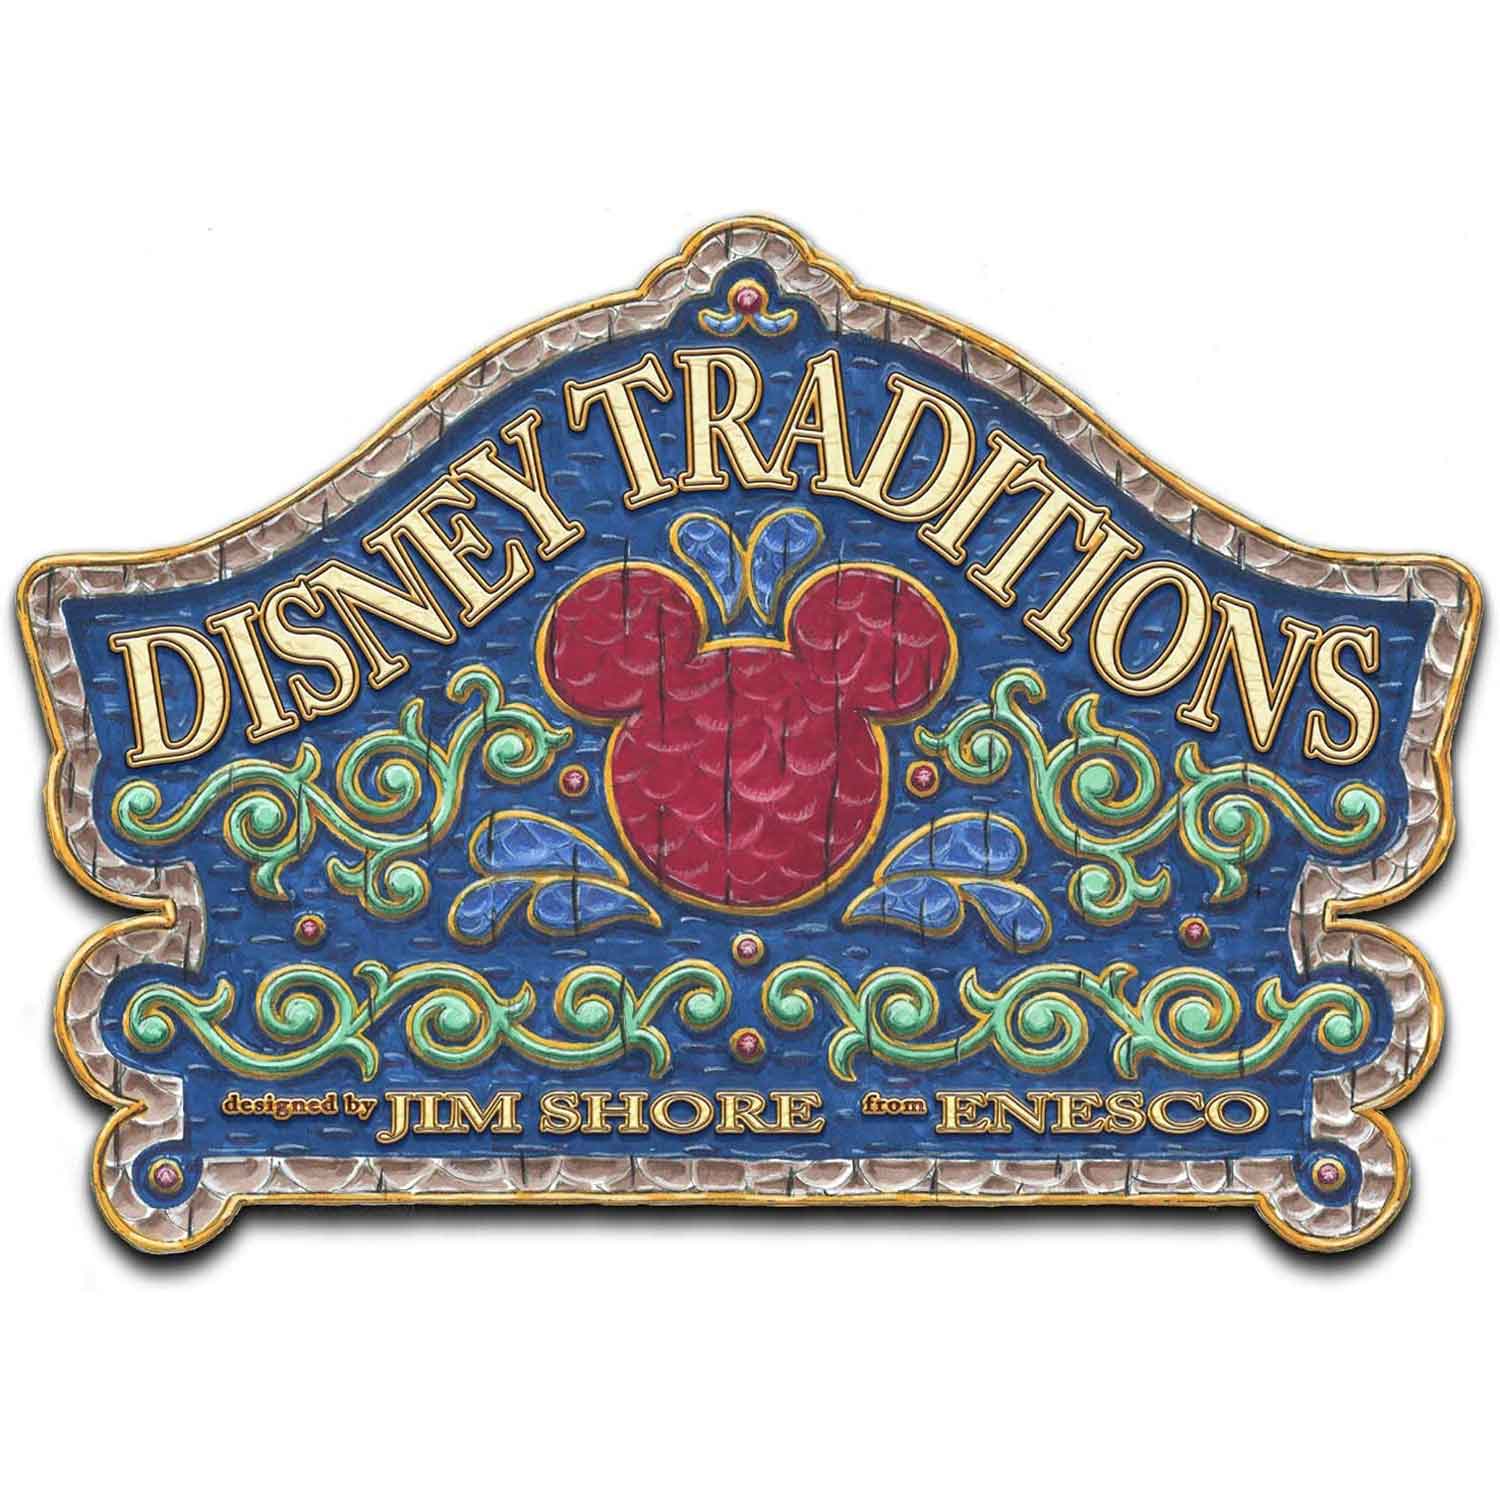 Disney Traditions Minnie Mouse with wreath as pendant